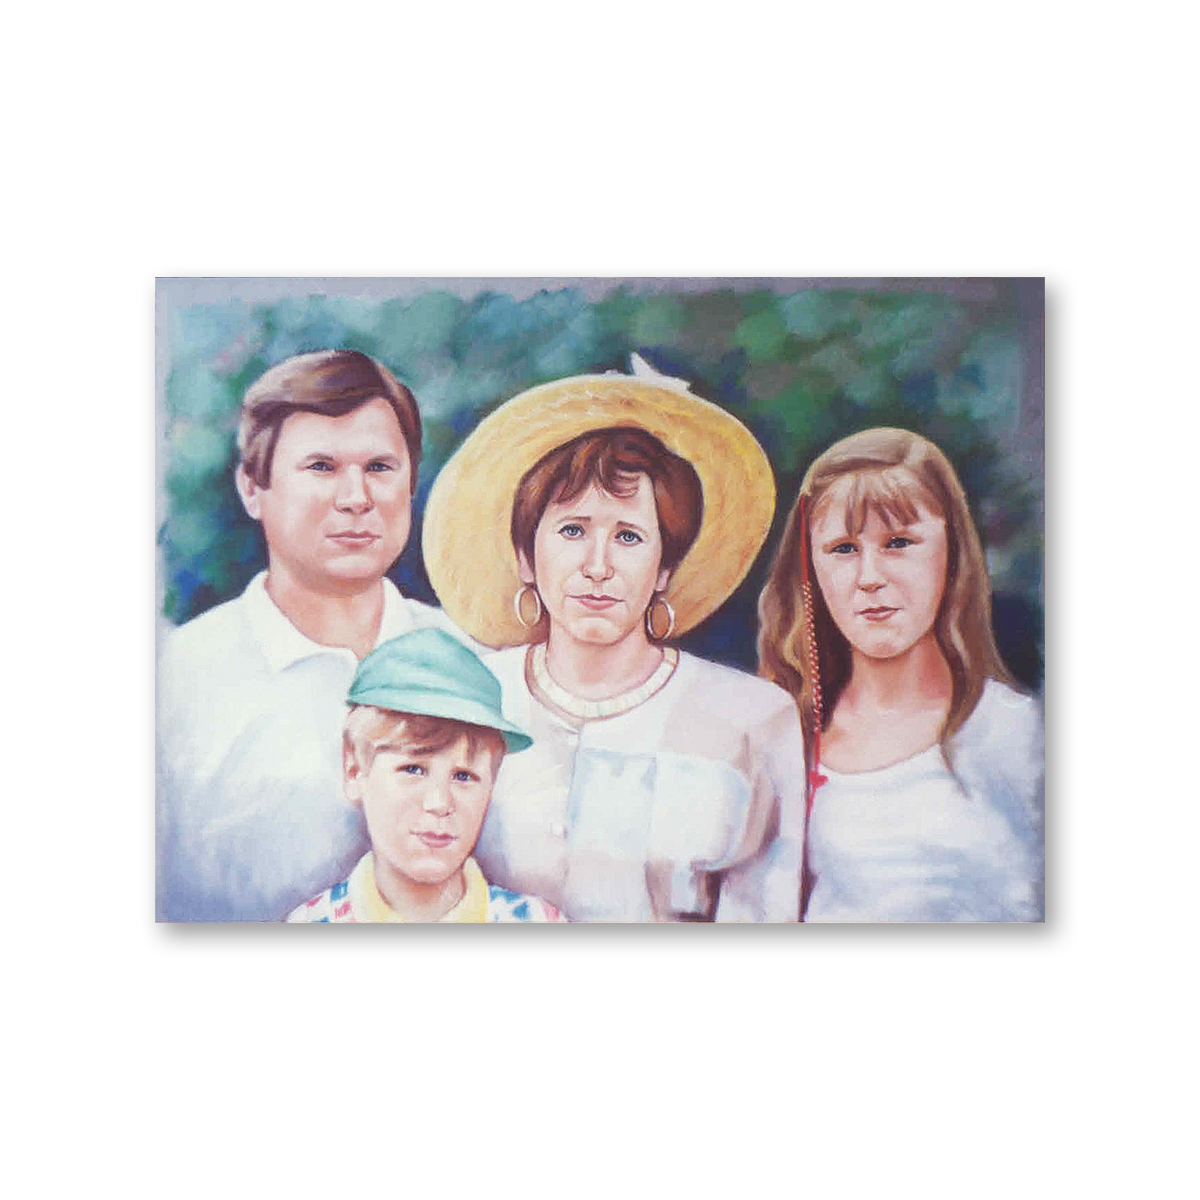 Family pastel portrait of four, of a mom and dad with eldest daughter and younger son, on a dark green background. Parents with their two kids – a boy and a girl. They are all Caucasian, light-skinned, with brown hair and brown eyes. The woman is wearing a straw hat, hoop earrings, and an elegant light pink top. The man and the girl are wearing white, and the boy is wearing a light green baseball cap.